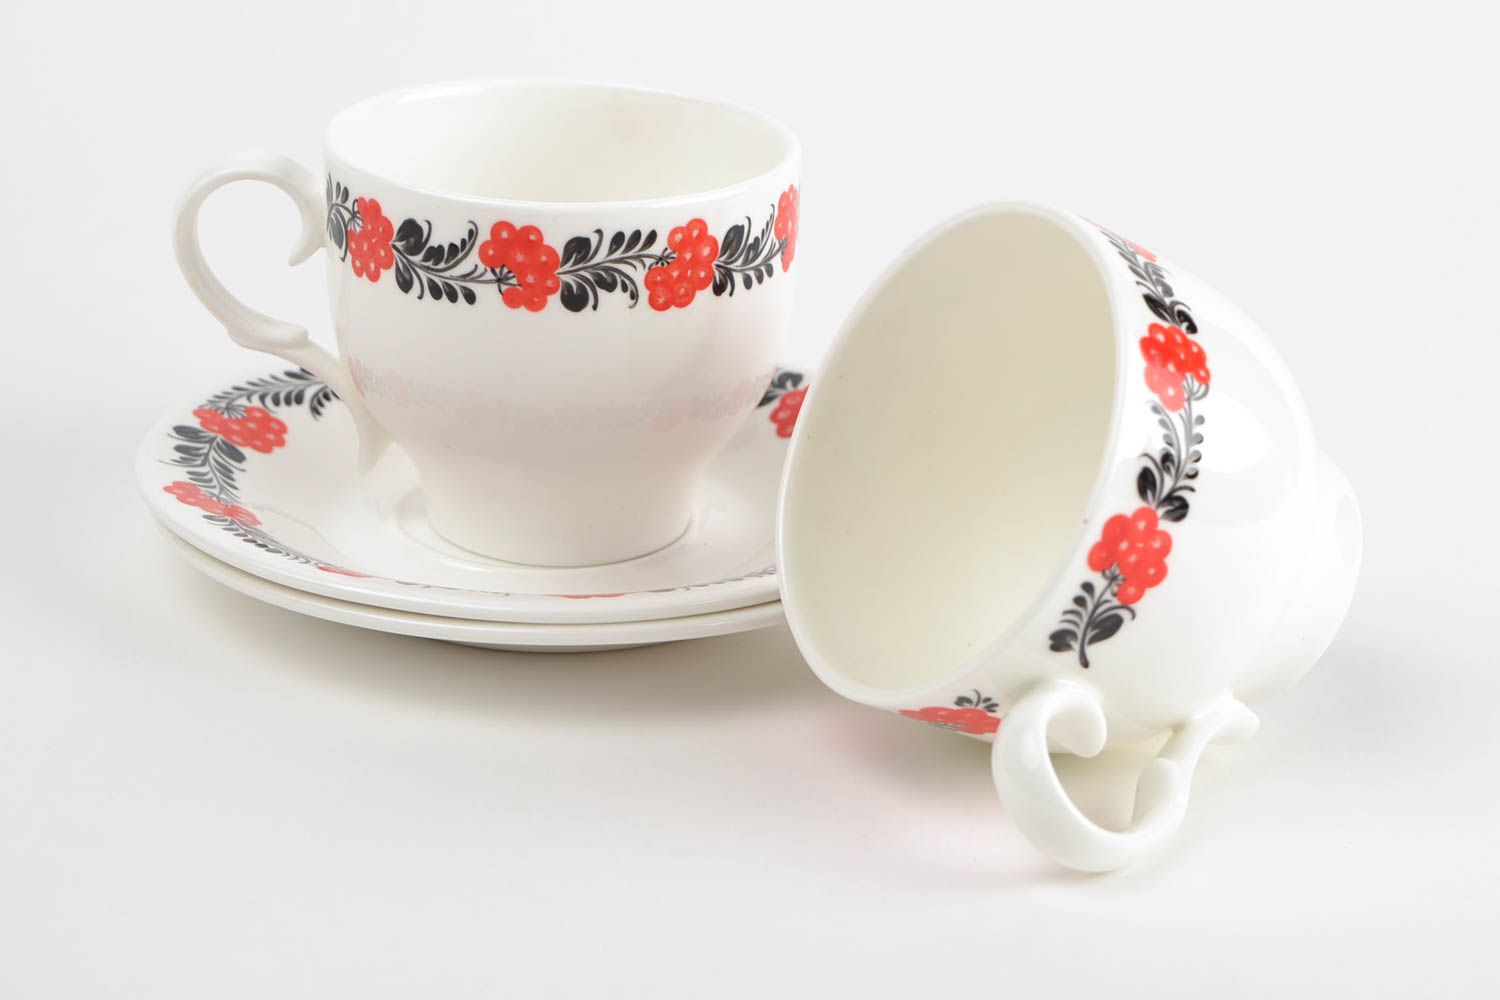 Set of 2 handmade porcelain cups and saucers decorative tableware gift ideas photo 3